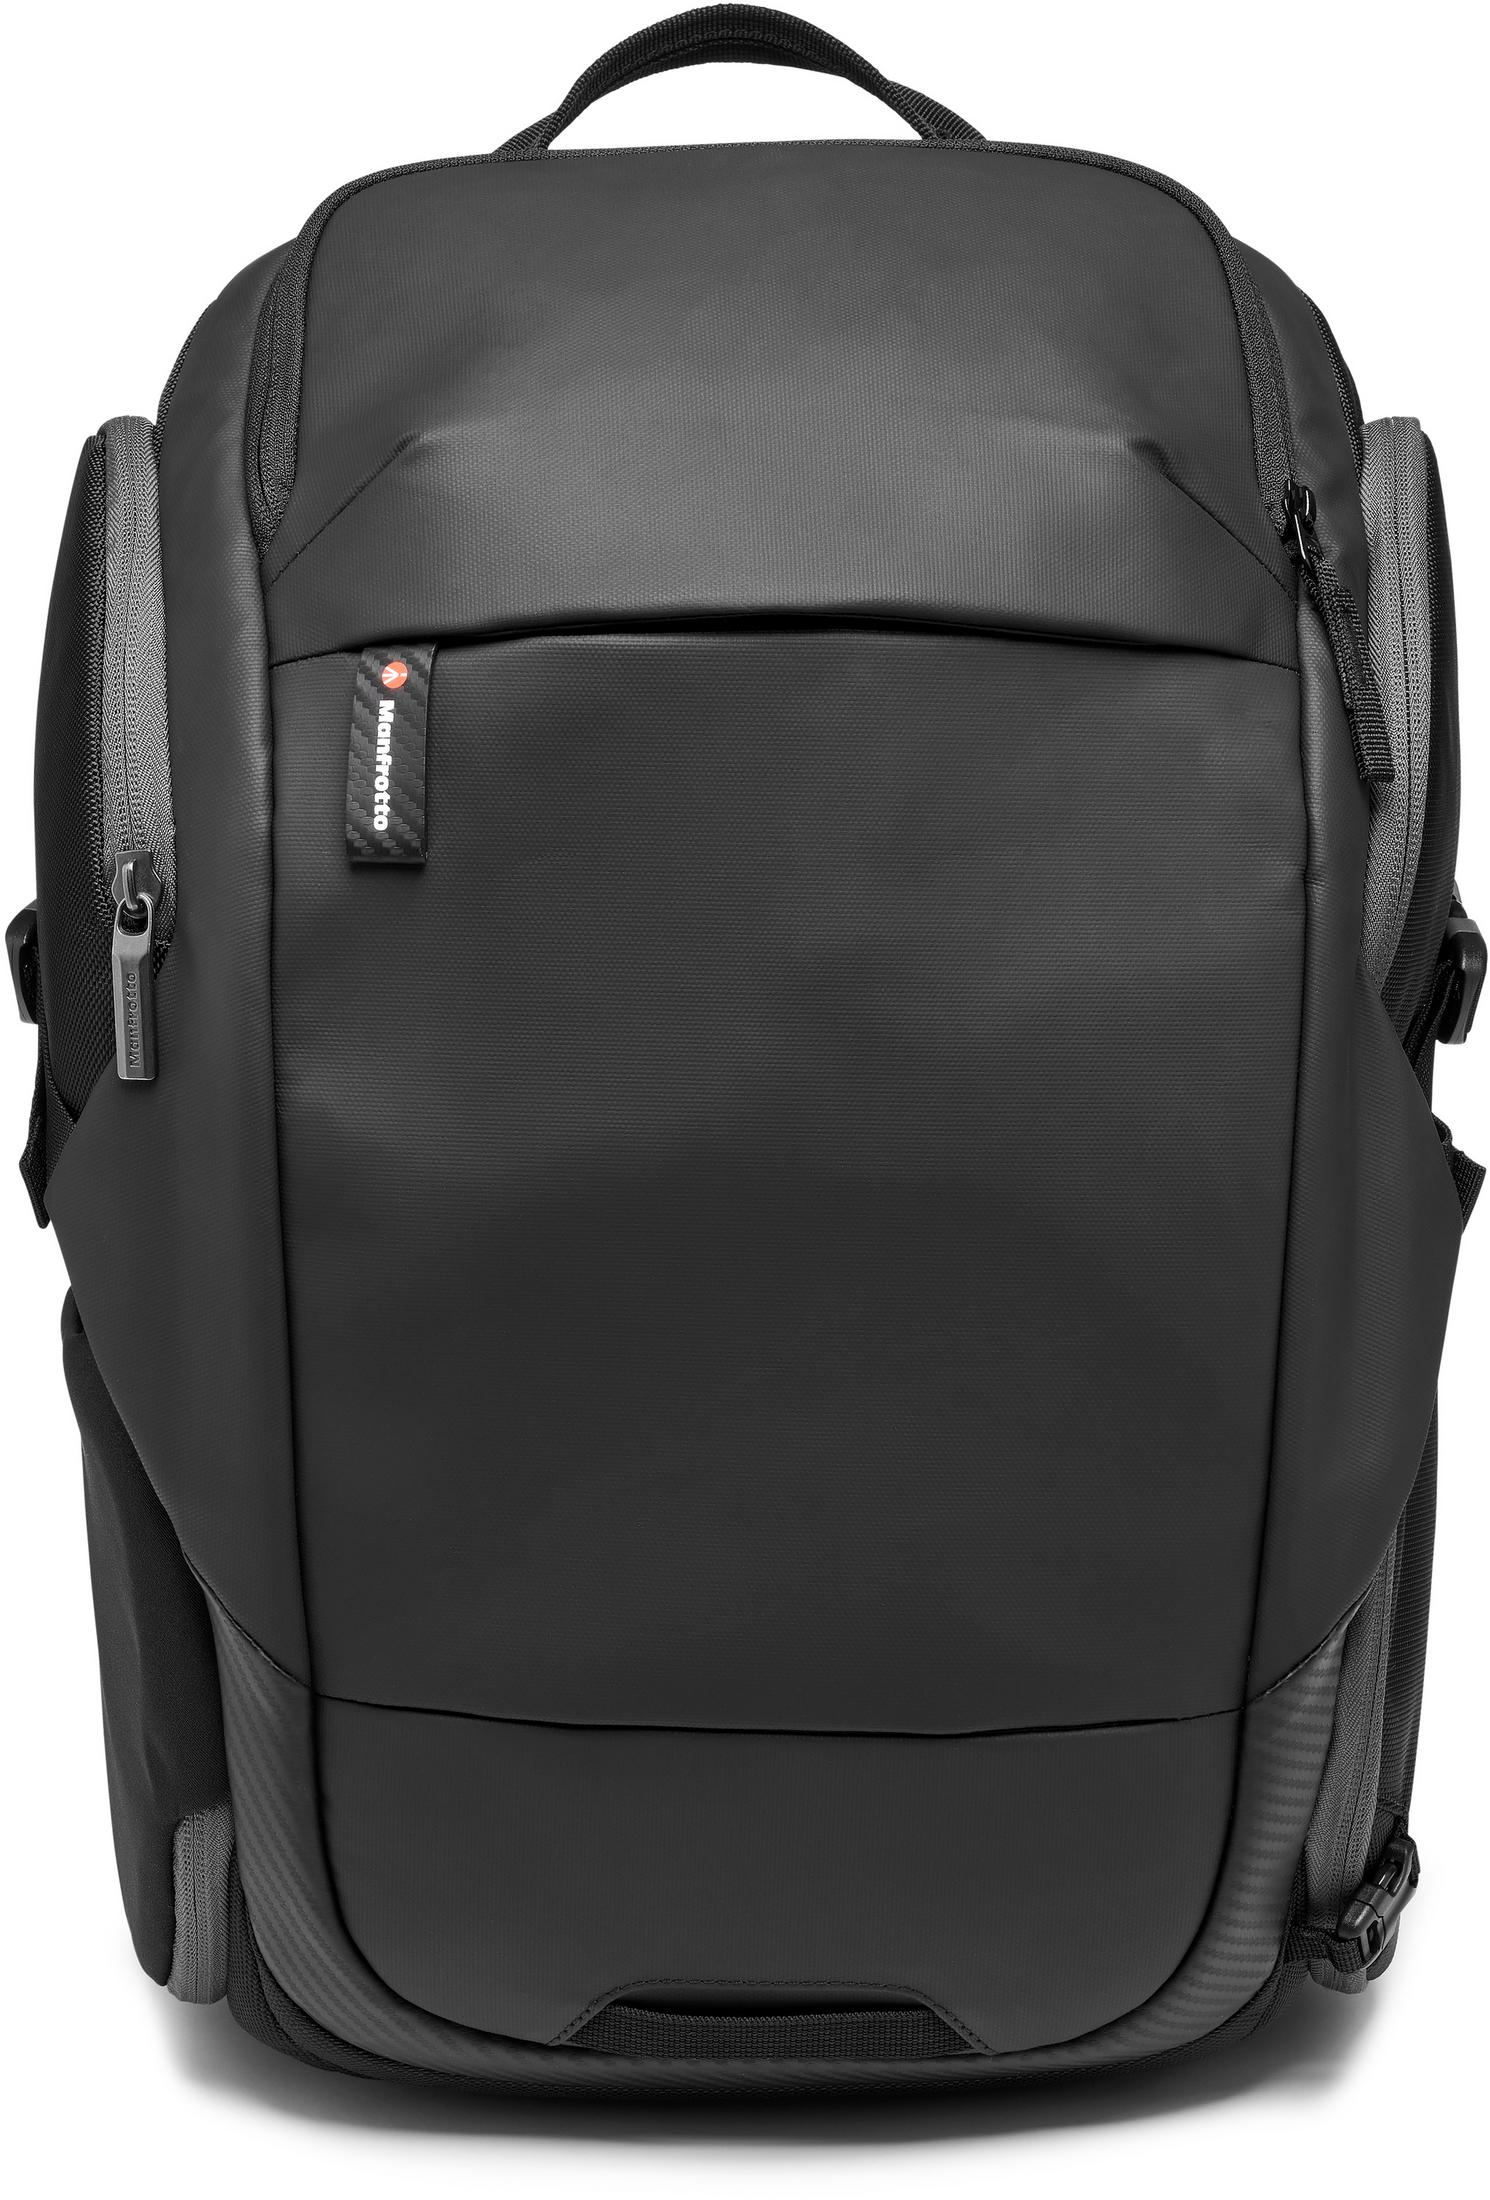 BACKPACK MANFROTTO M TRAVEL Kameratasche, MB Schwarz ADVANCED2 MA2-BP-T